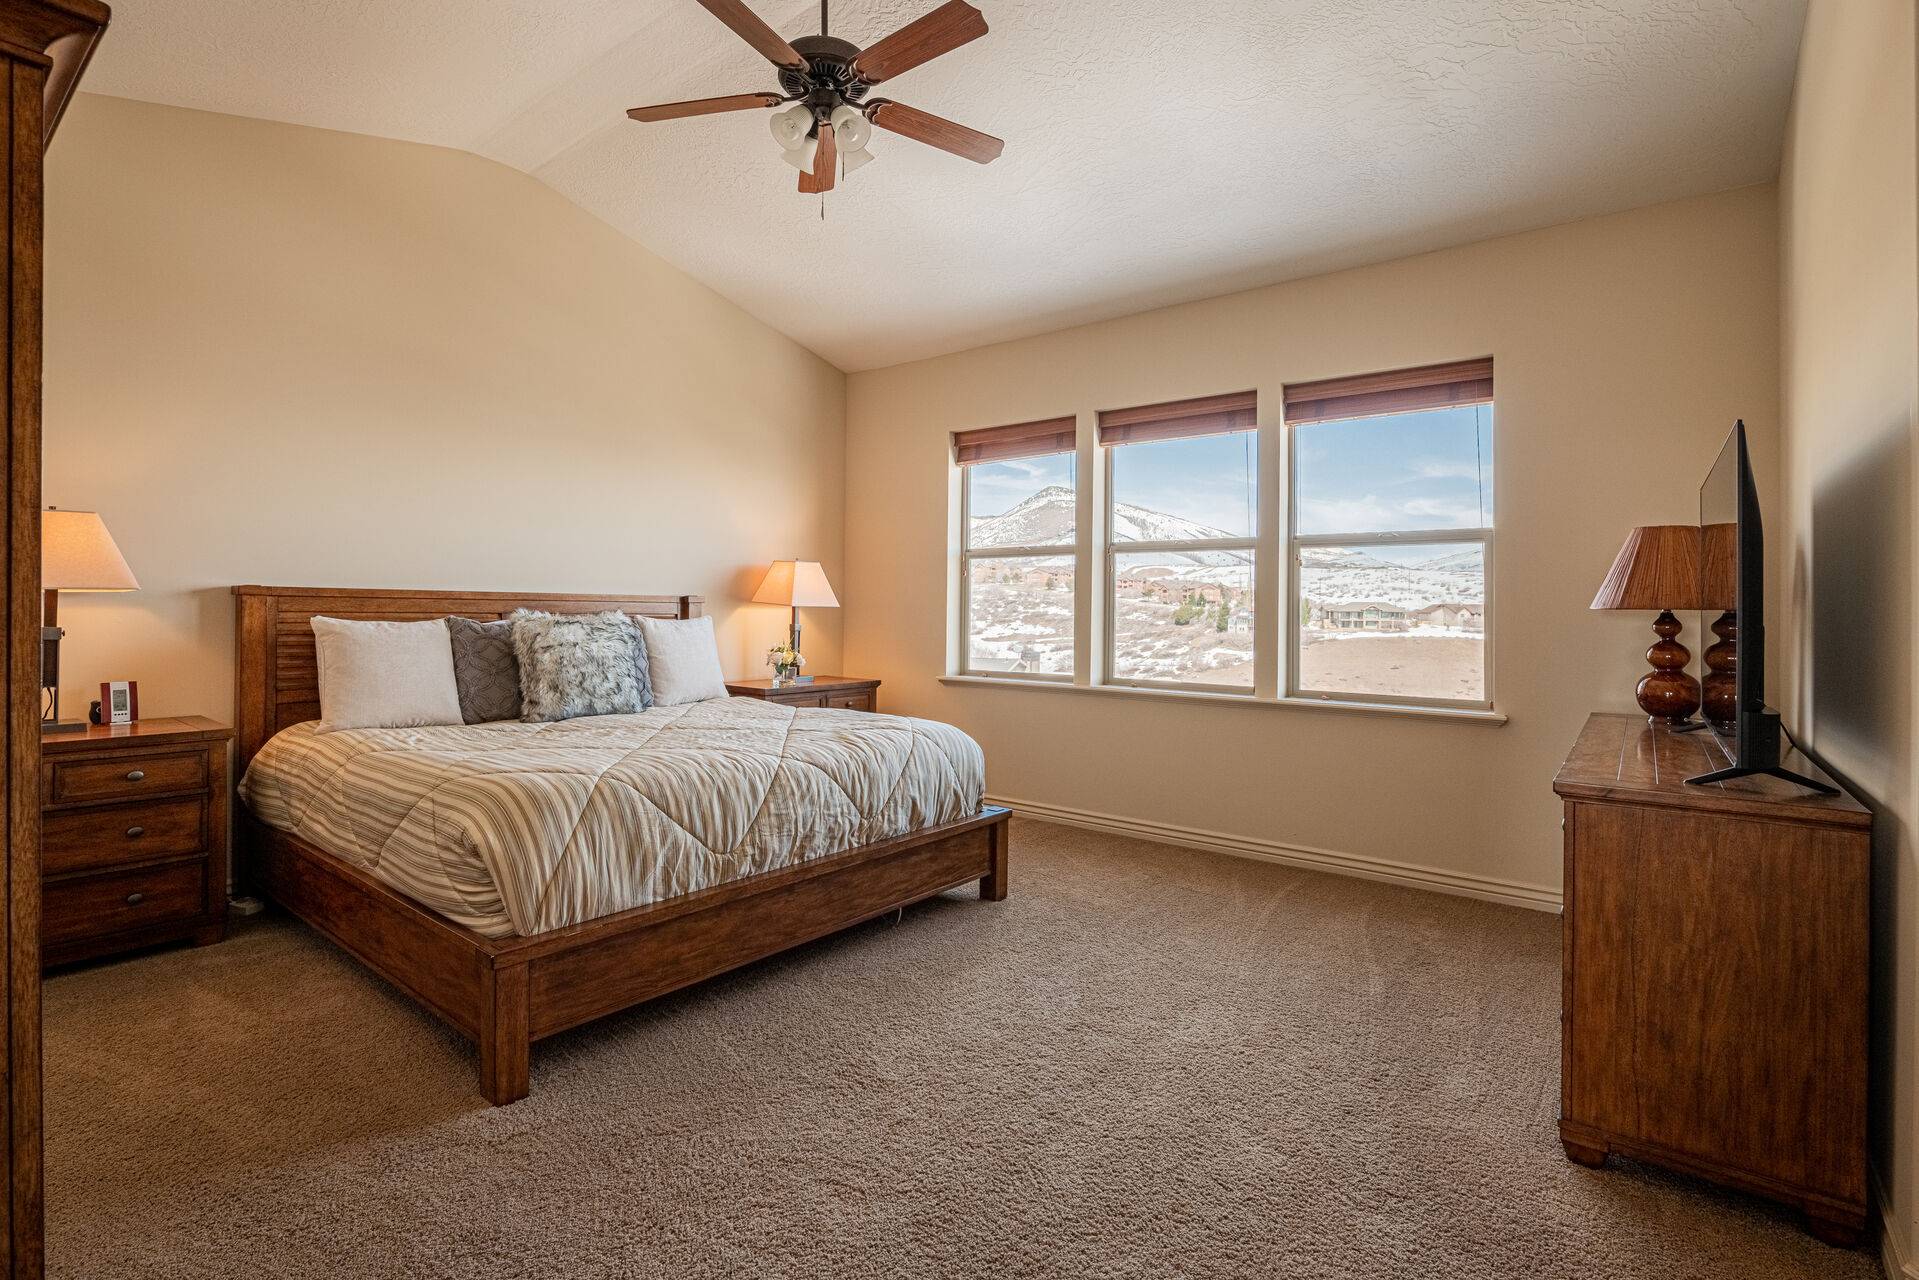 Upper Level Master Bedroom with a King Bed and Great Views